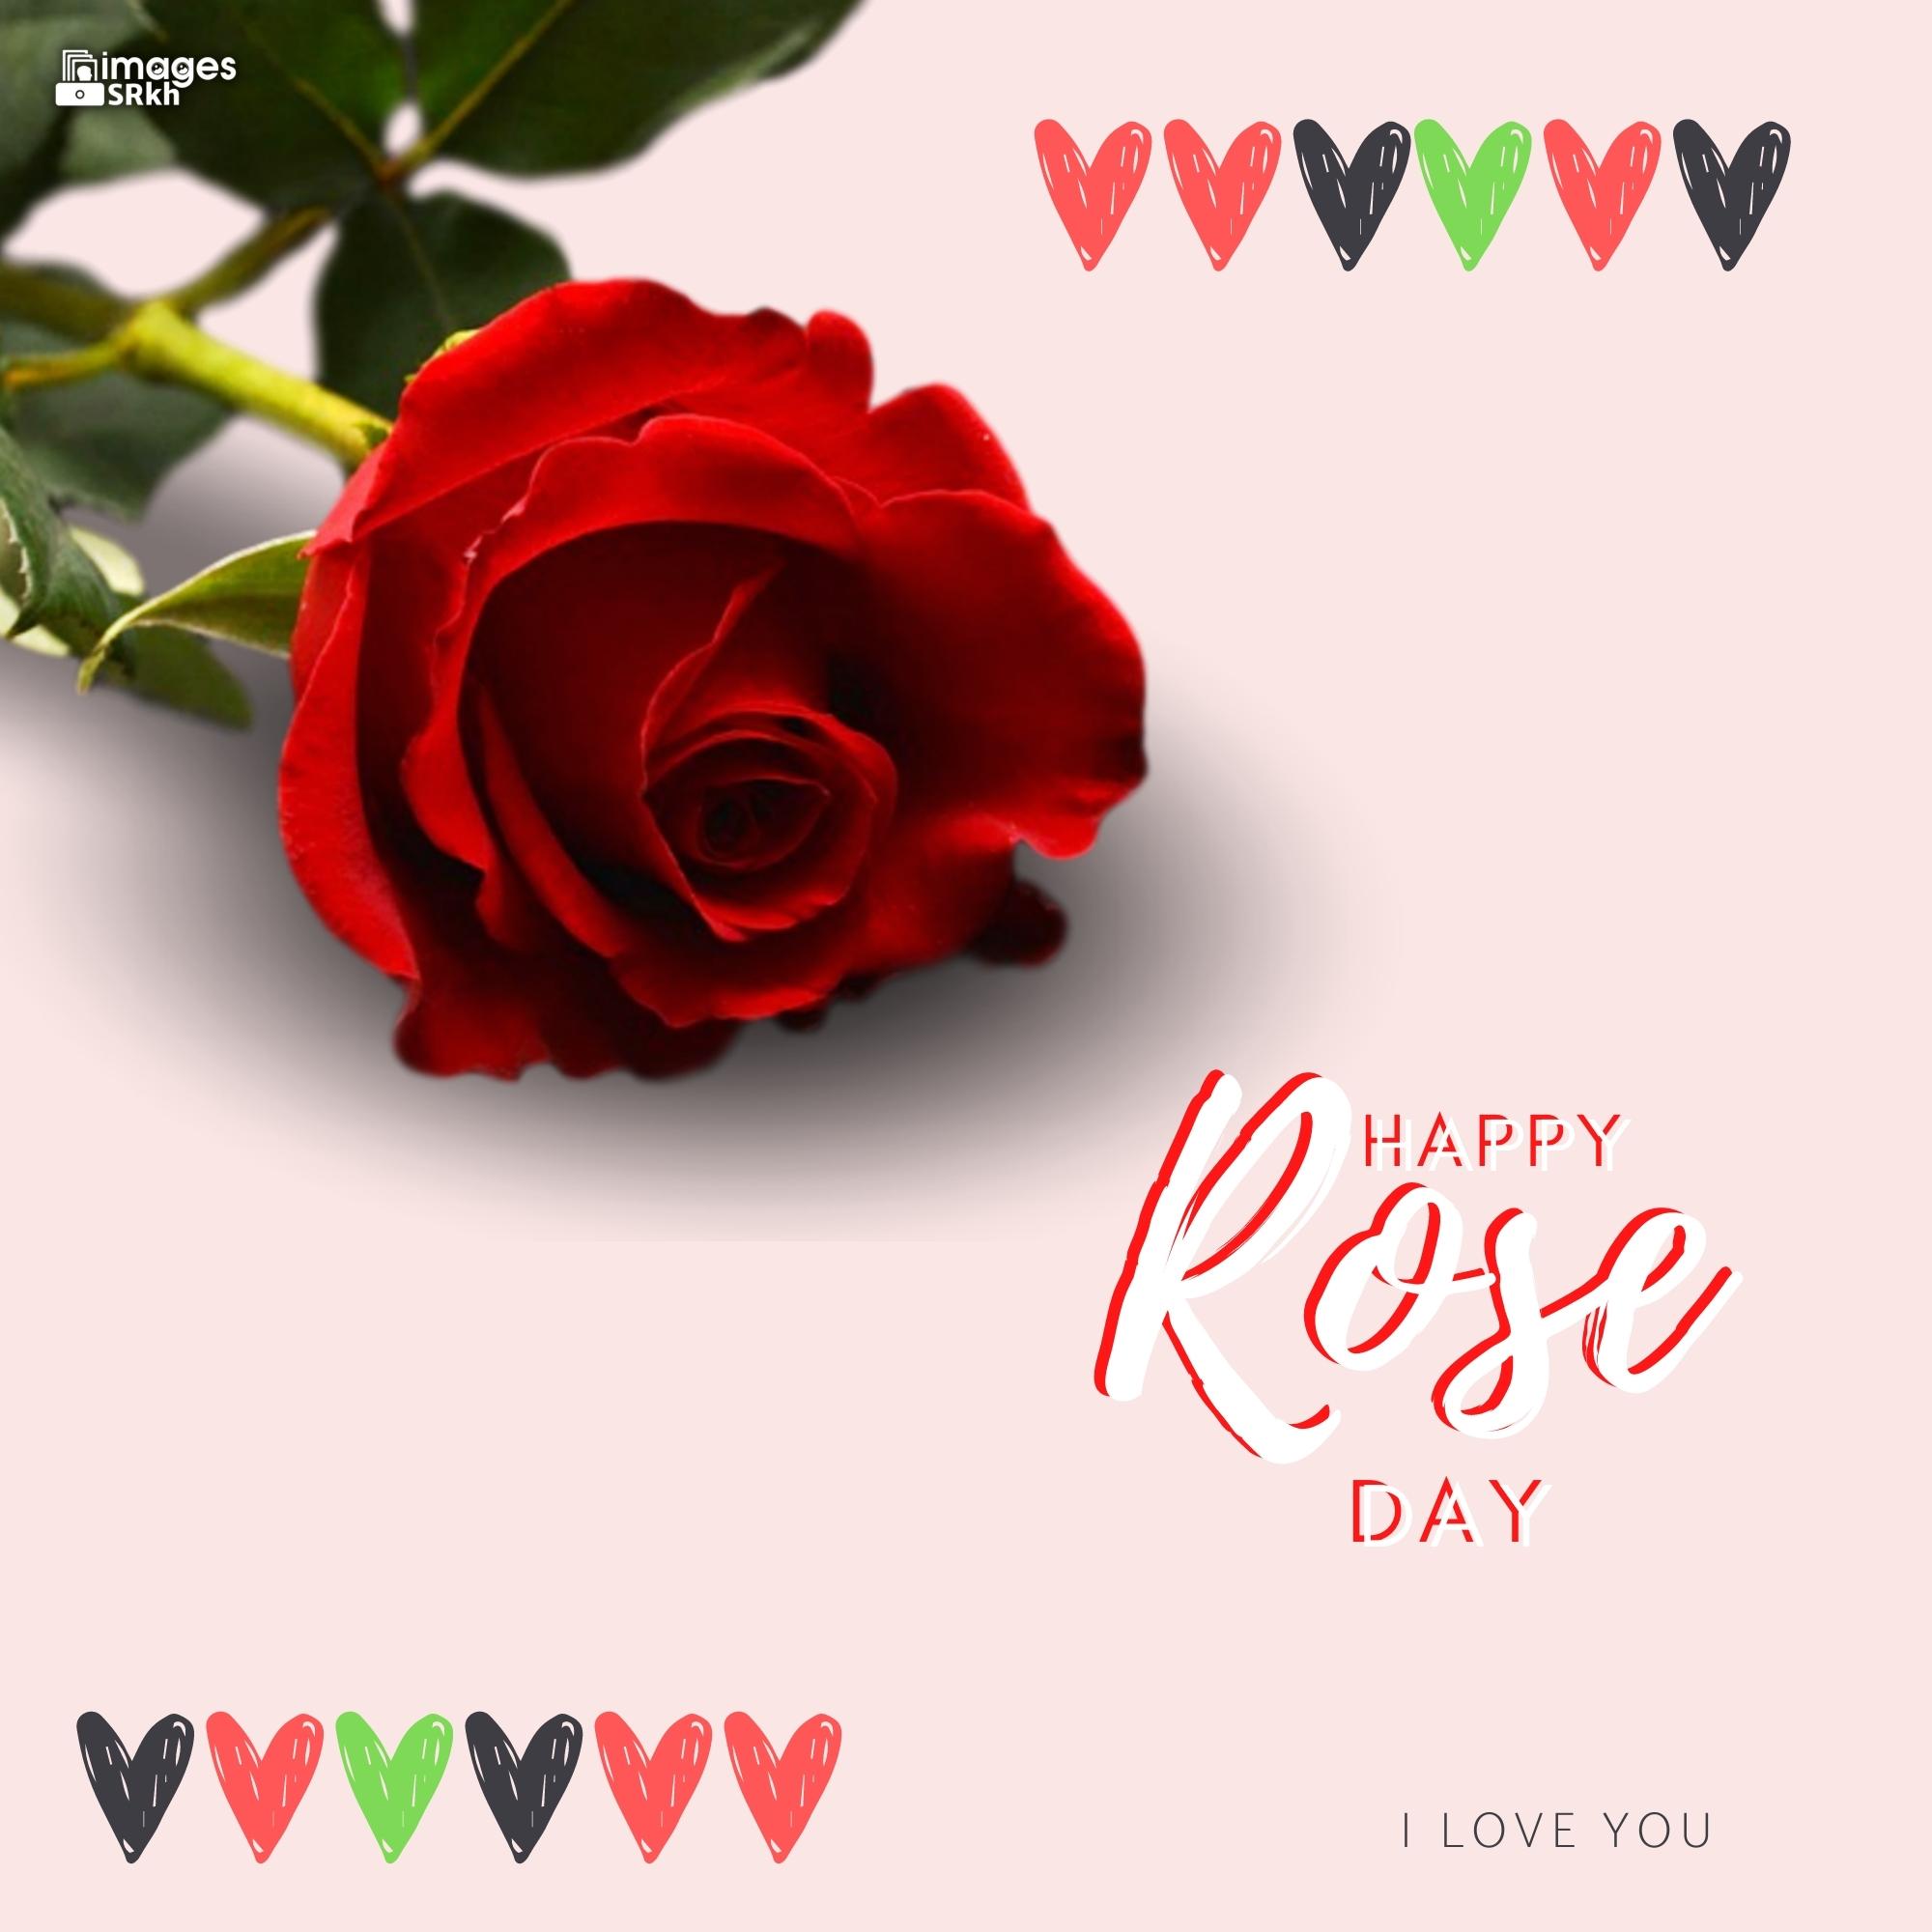 Happy Rose Day Image Hd Download (90)